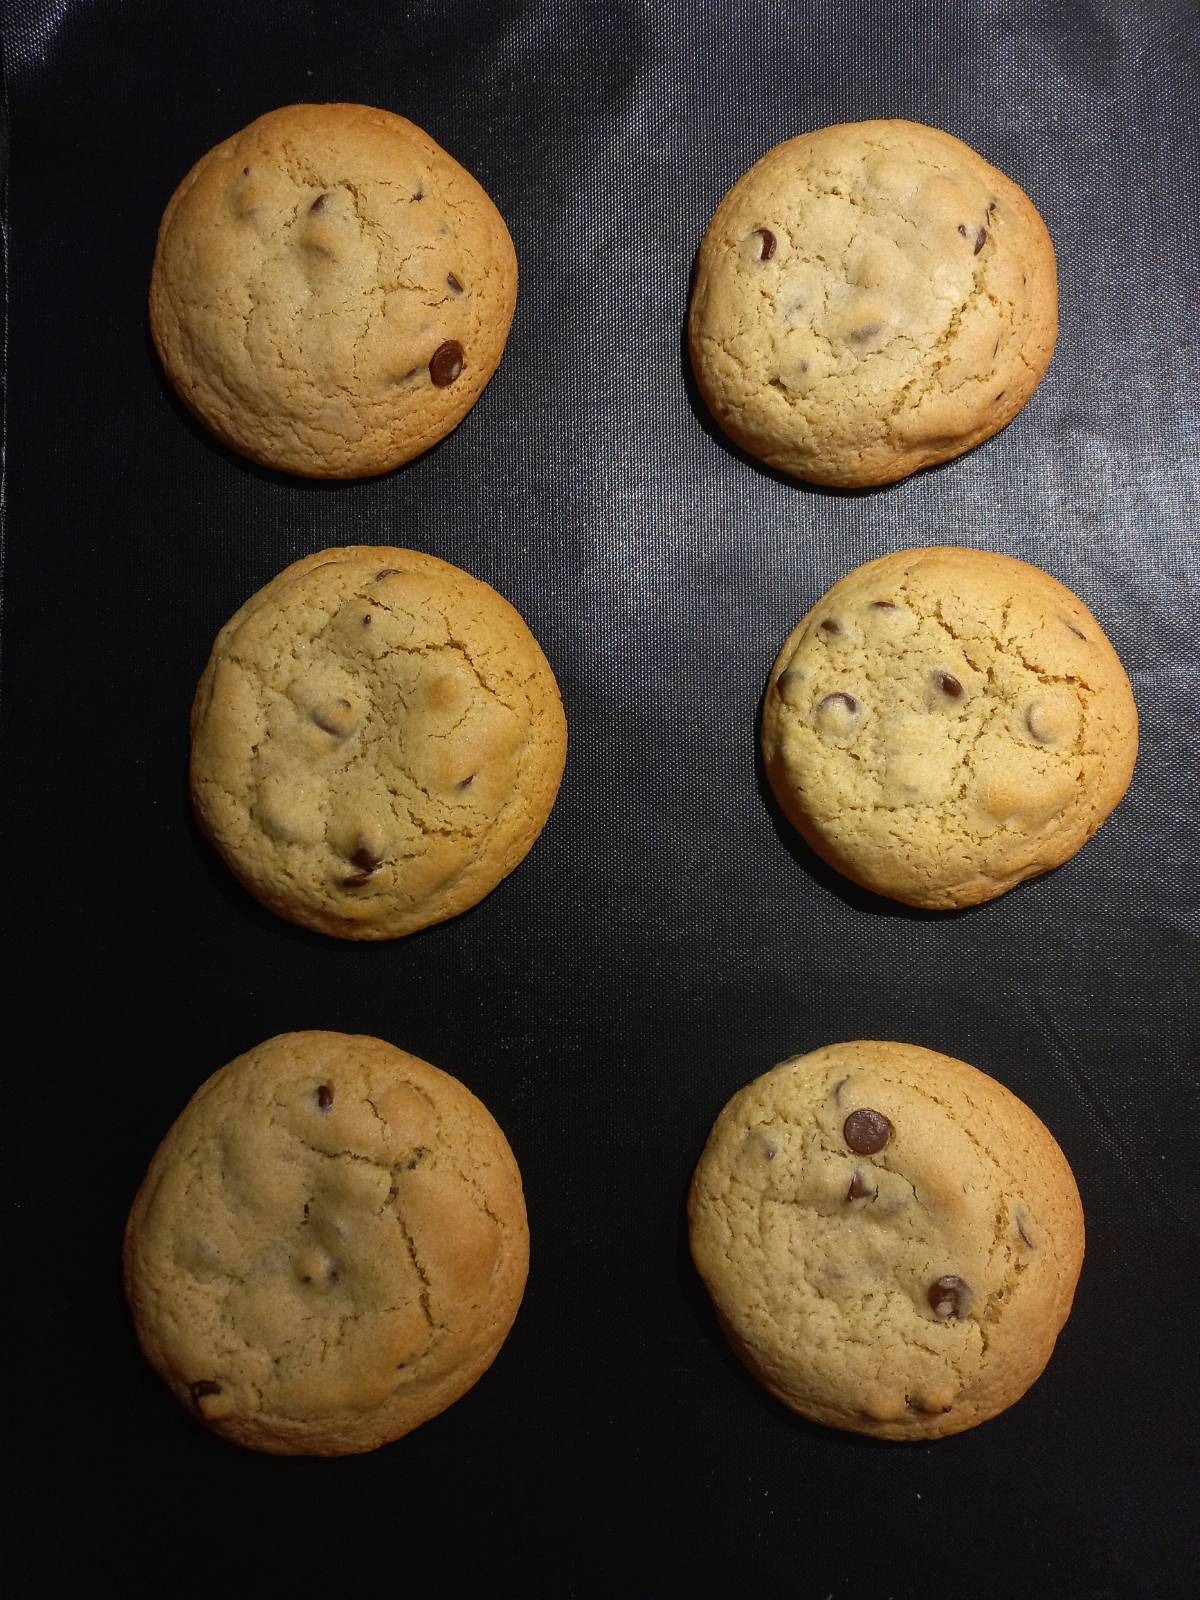 The Best Chocolate Chip Cookies – Mantin in the air